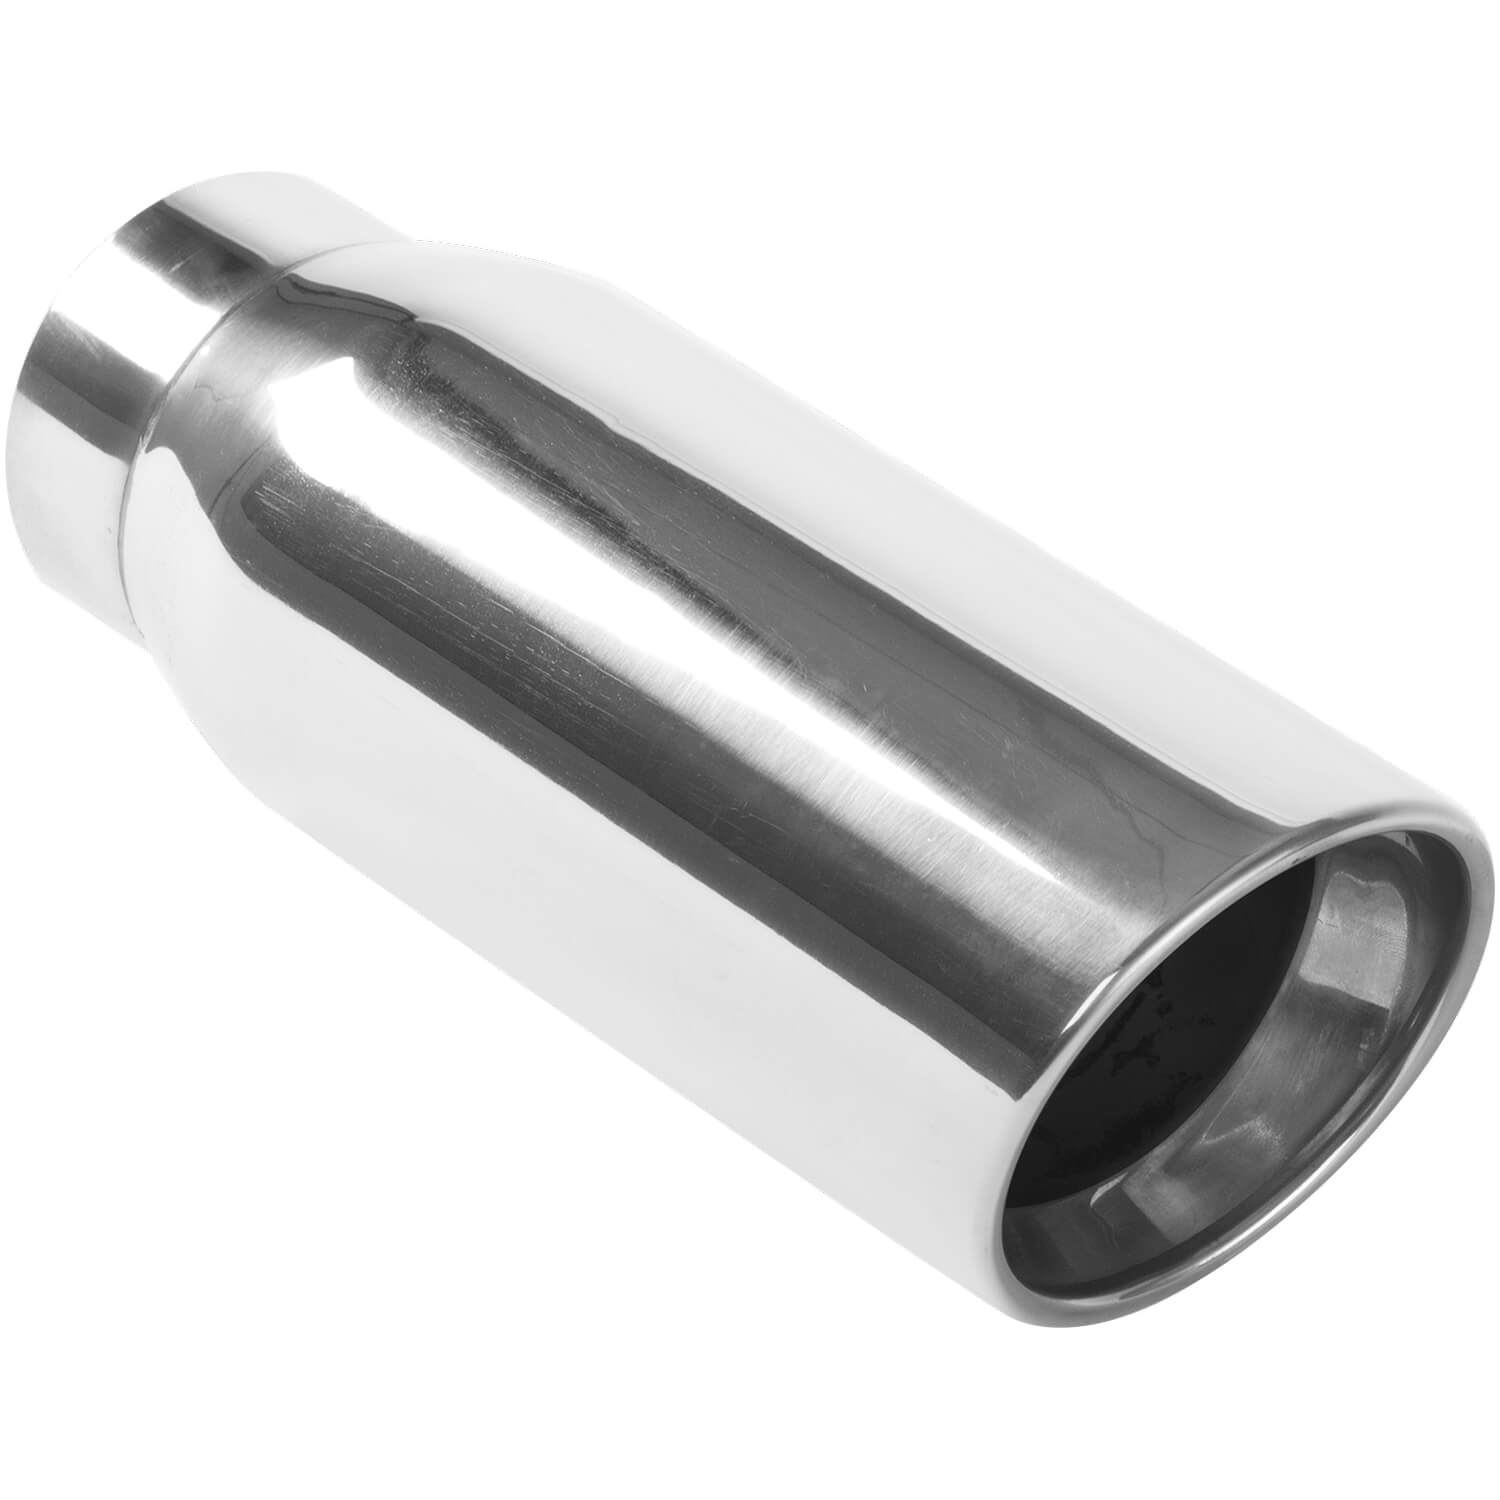 Polished Stainless Steel Weld-On Single Exhaust Tip Inlet Inside Diameter: 3.5"